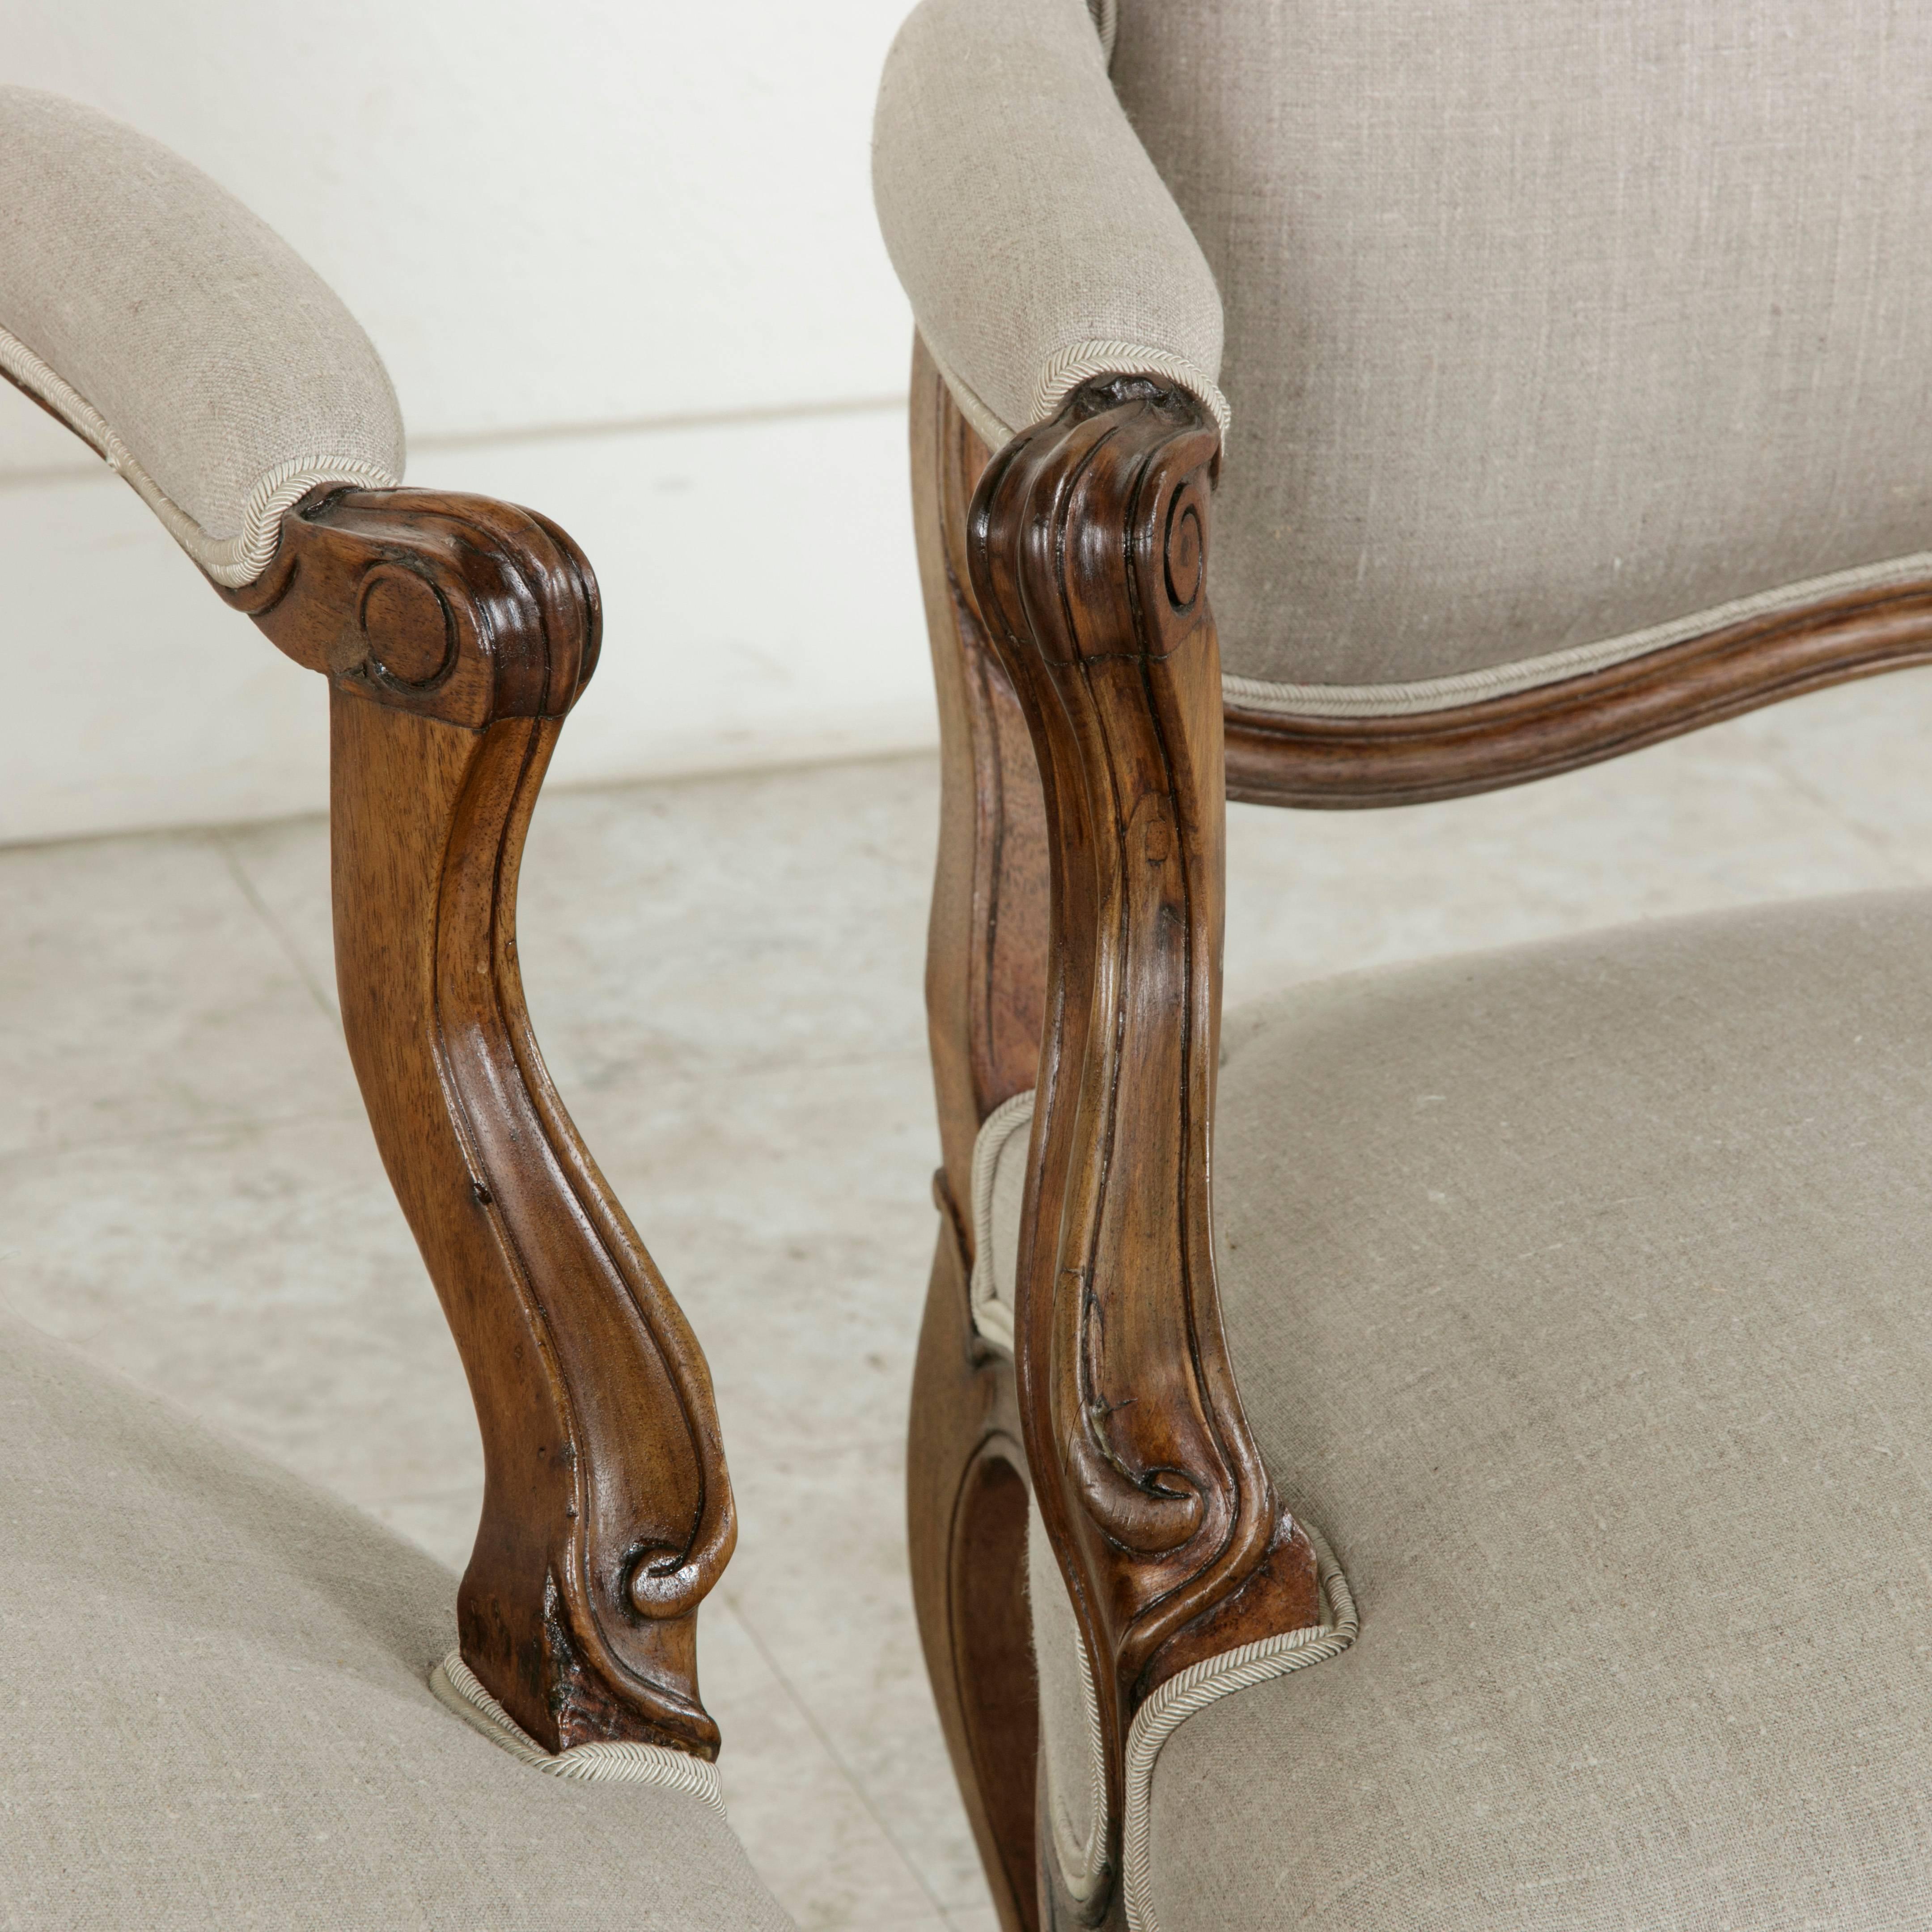 This pair of nineteenth century hand carved walnut armchairs is presented in the classic French Louis XV style. With gently curved cabriole legs and hand carved scrolled armrests, this fine pair includes details of carved flowers at the corners of